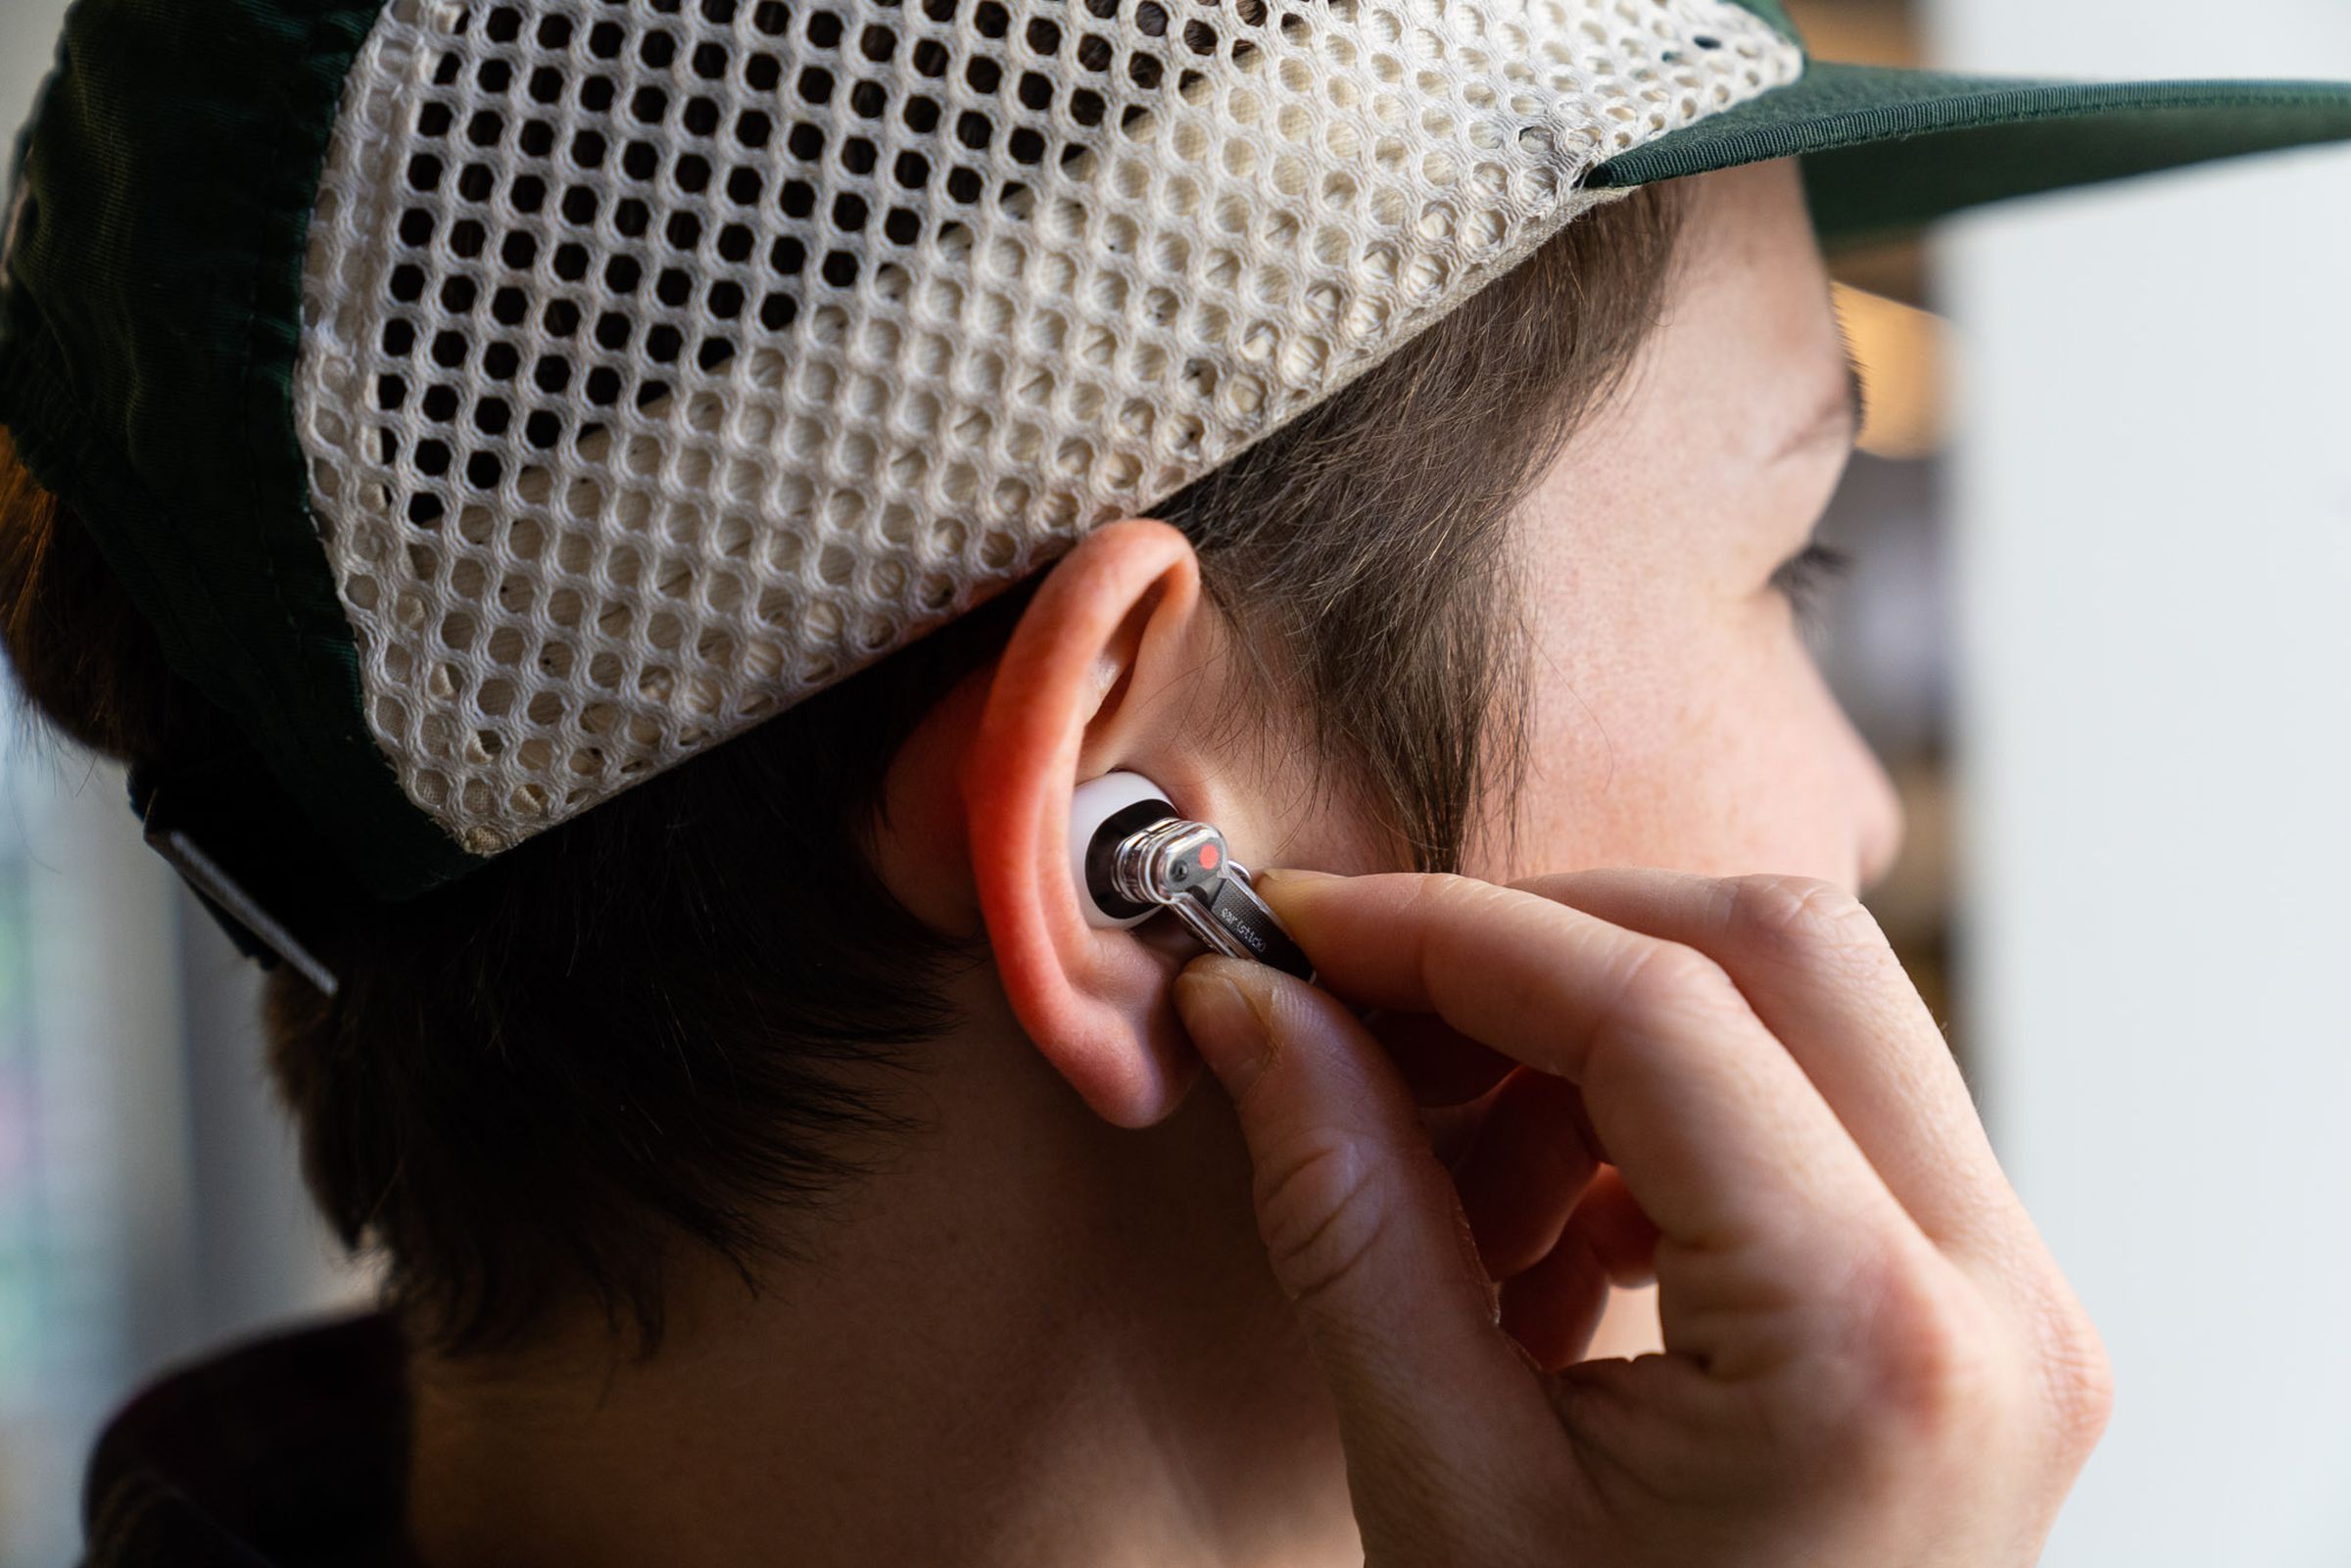 Woman wearing Nothing Ear Stick earbuds, pressing their controls.